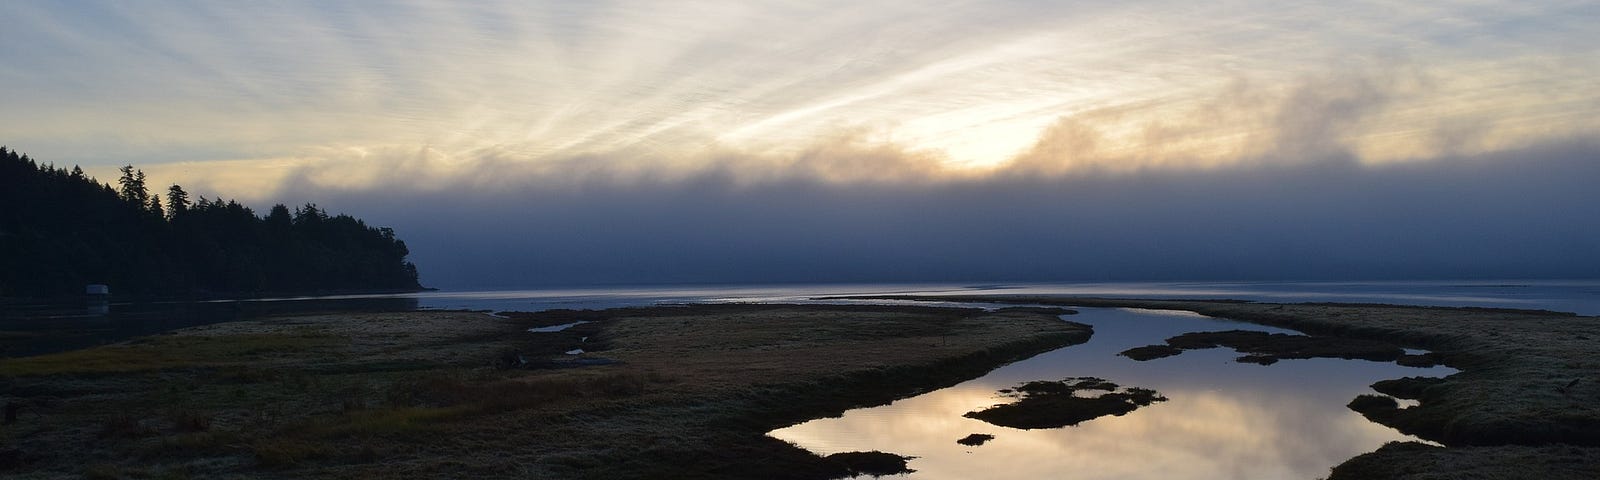 Photo of glassy tributary moving towards larger body/ocean at cloudy sunrise.